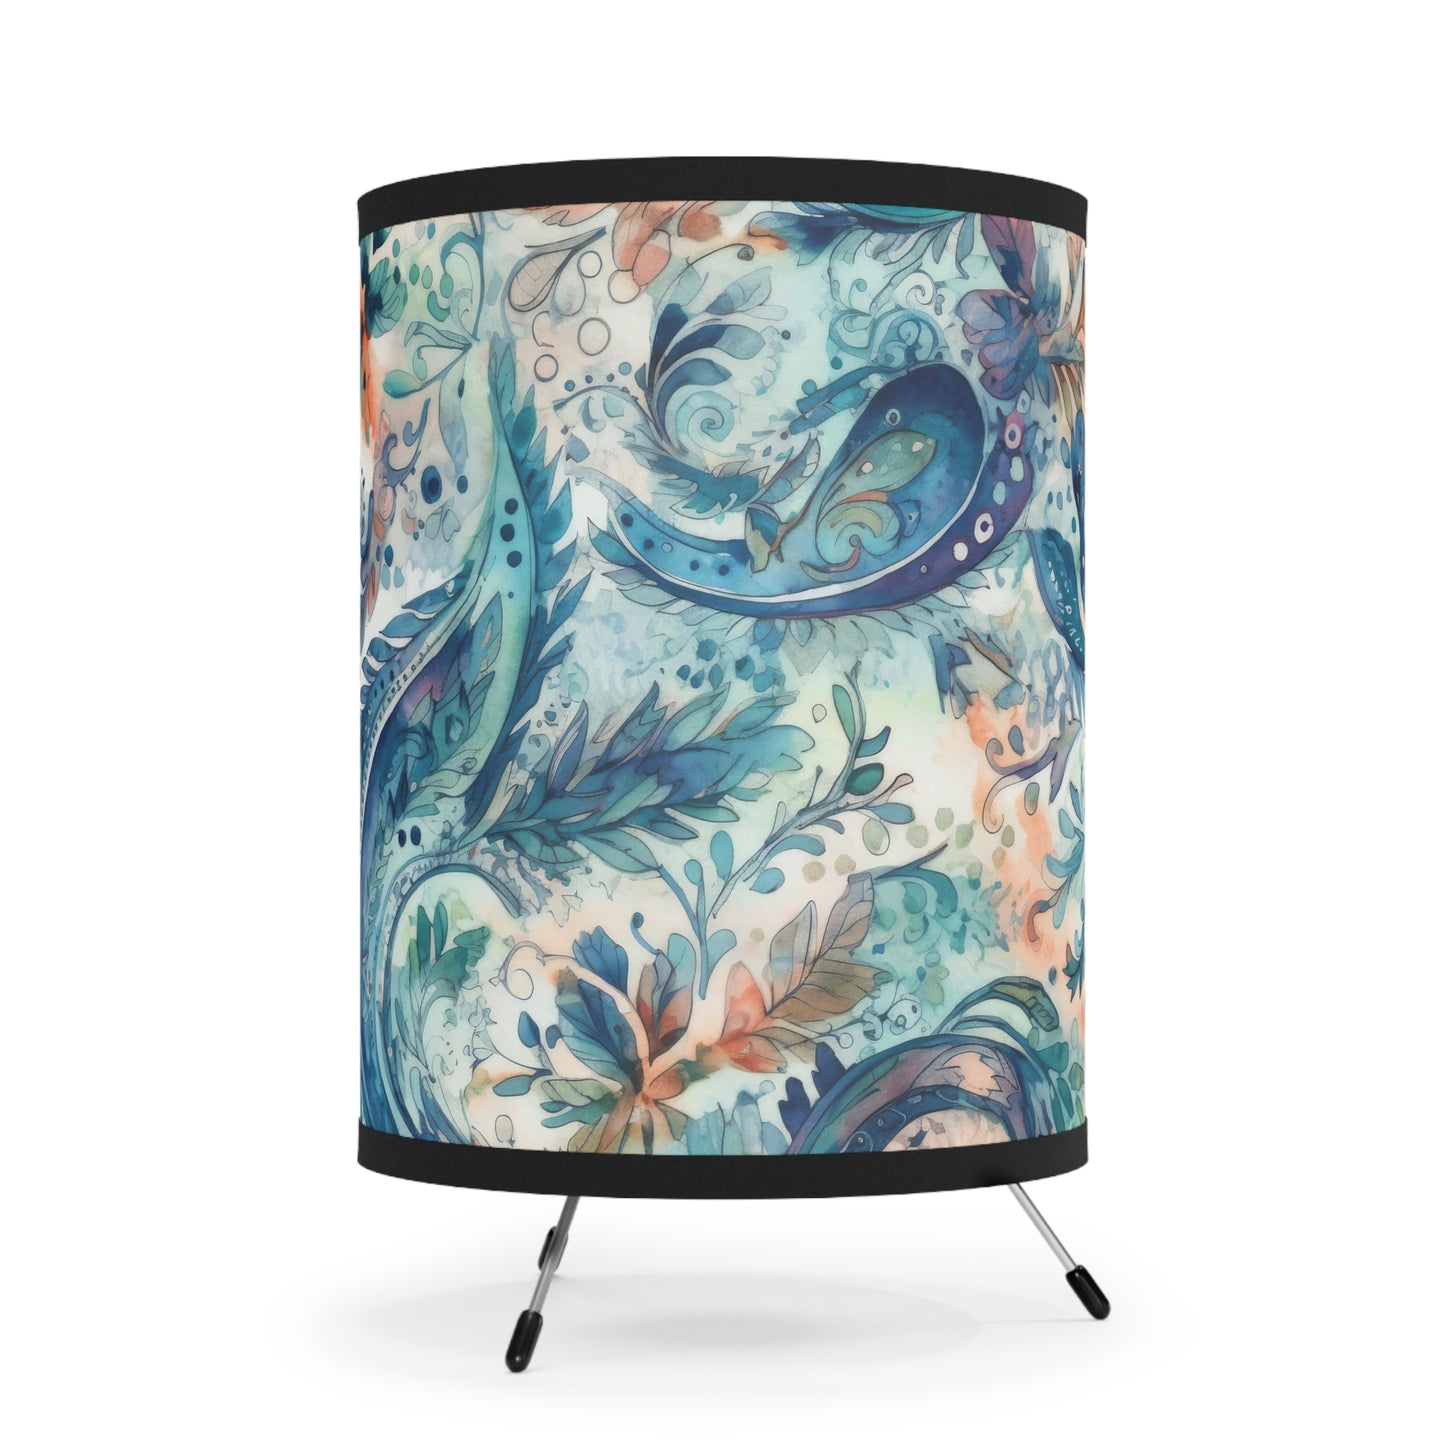 Beautiful and Unique - Watercolor Blue and Yelow Paisleys 1 - Tripod Lamp with High-Res Printed Shade, US\CA plug